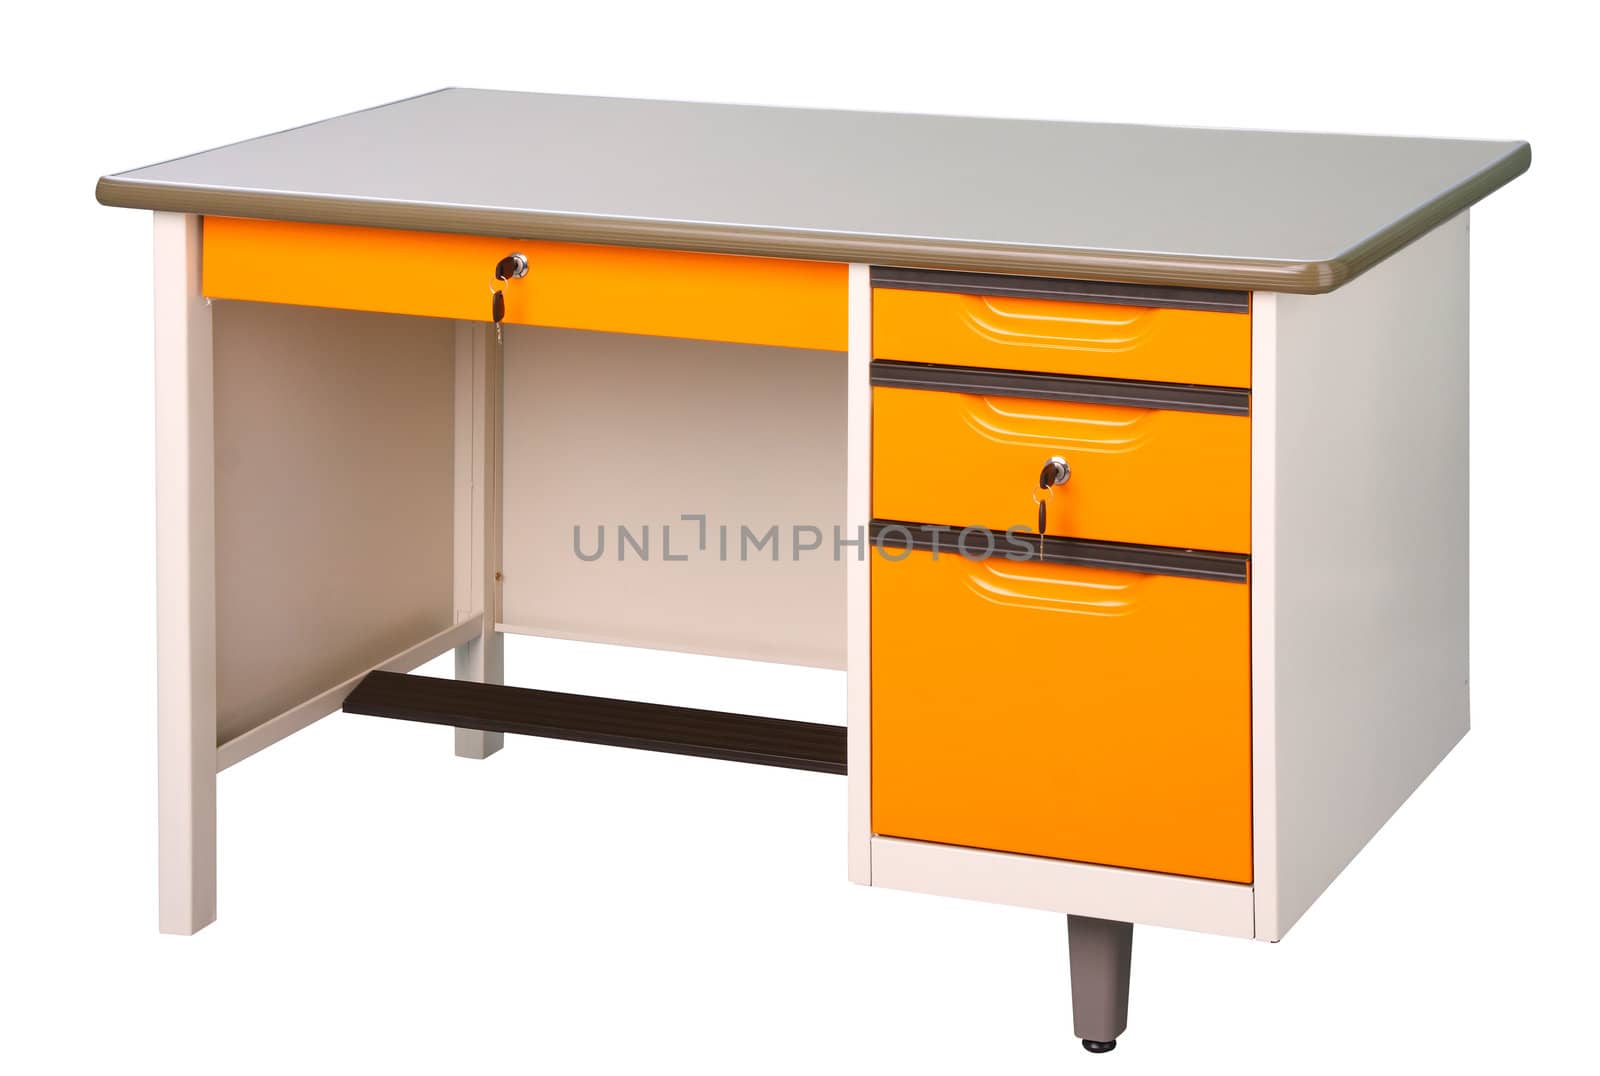 Stainless steel office or factory furniture isolates on white